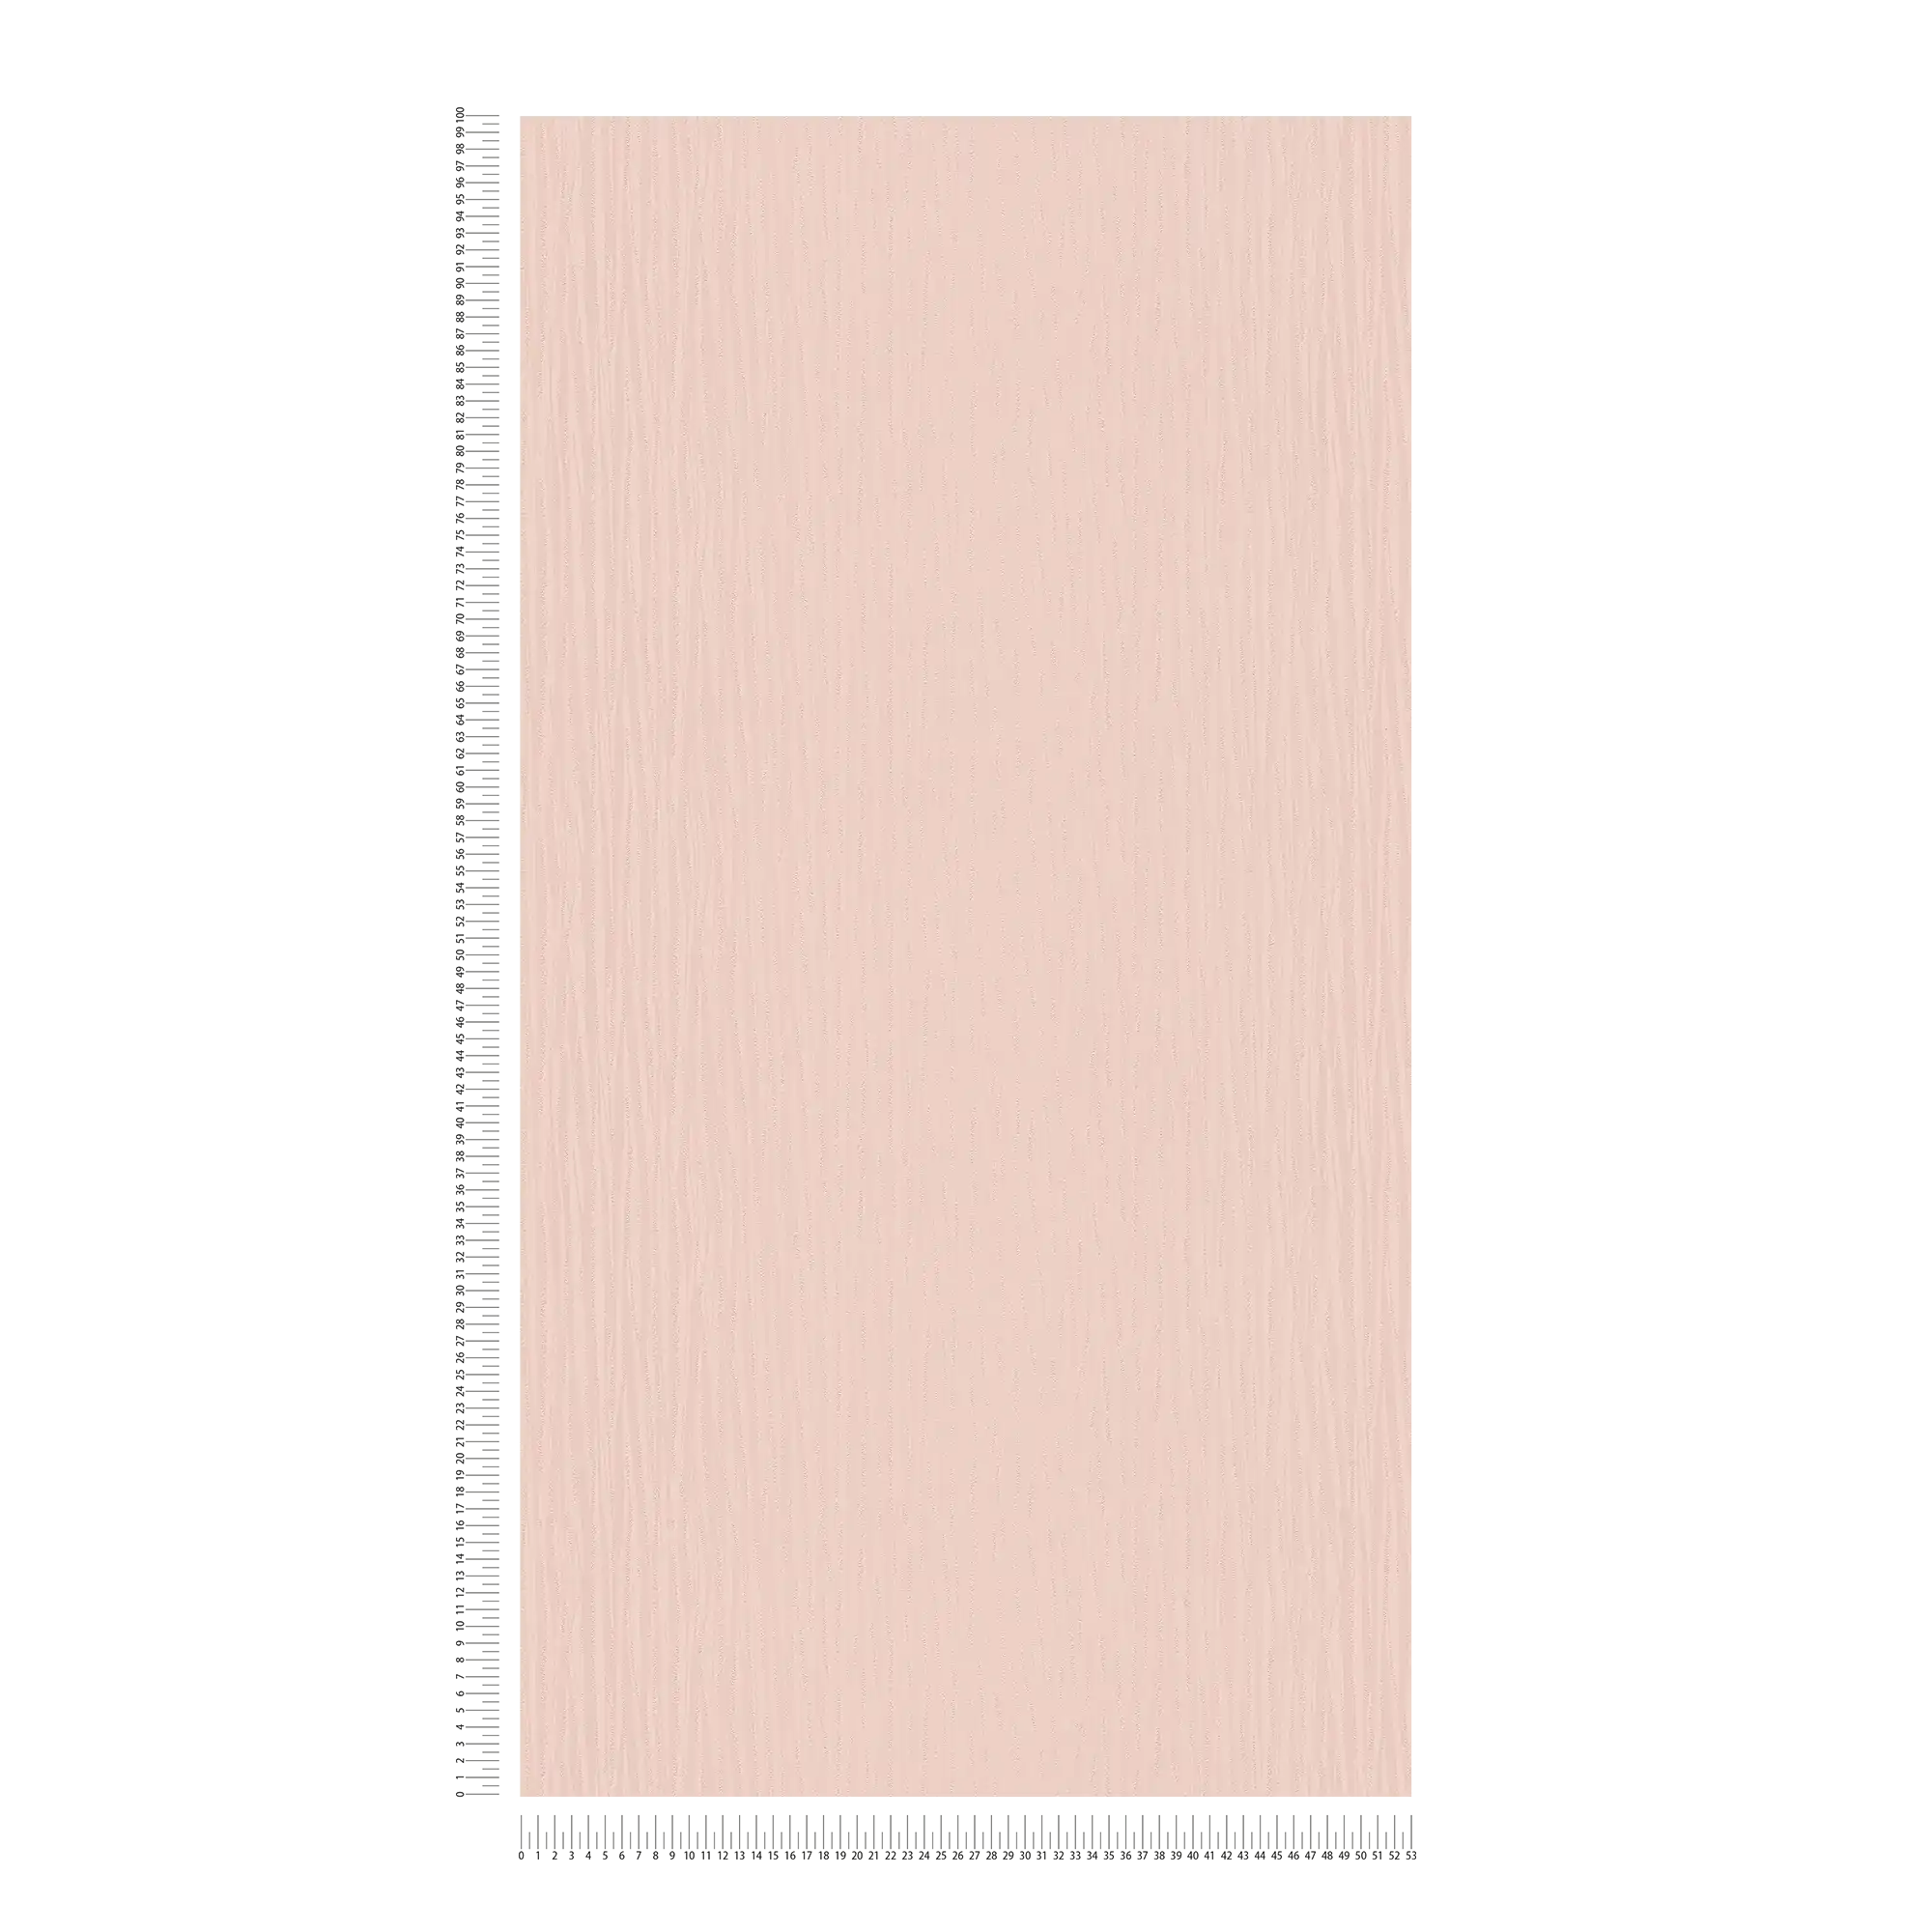             Non-woven wallpaper pink pastel with metallic luster & colour pattern
        